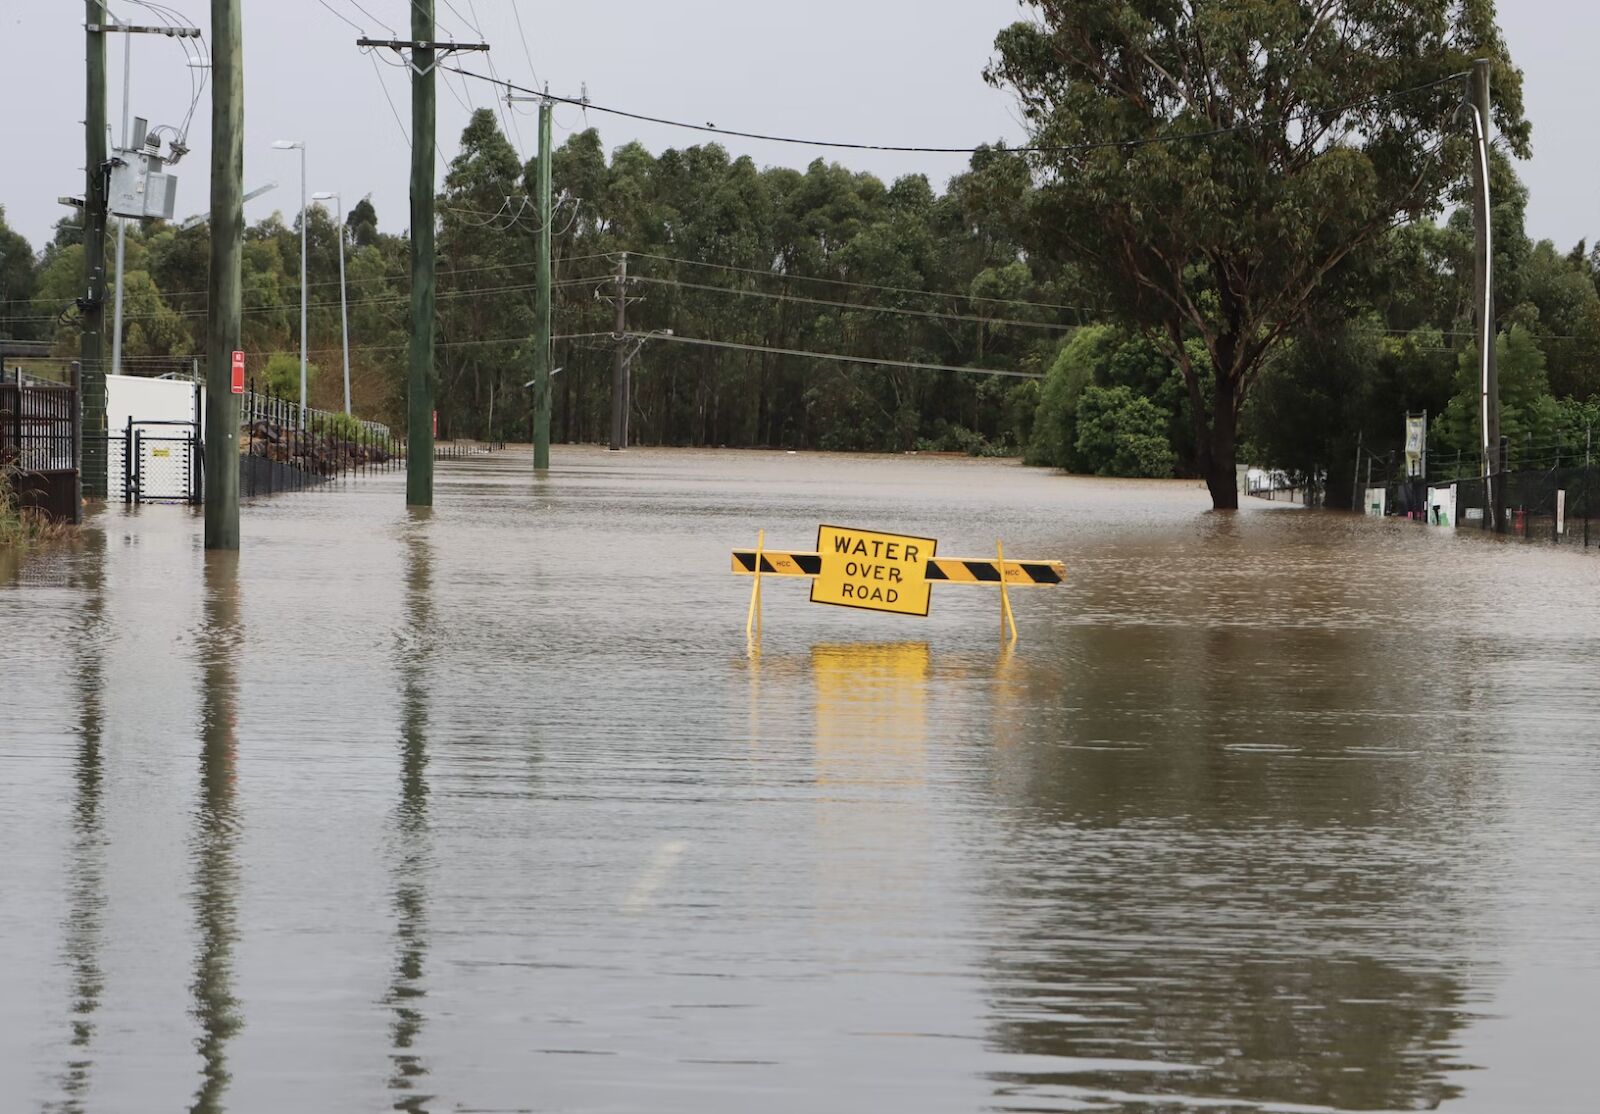 Flooded road with a sign saying “Water Over Road”.